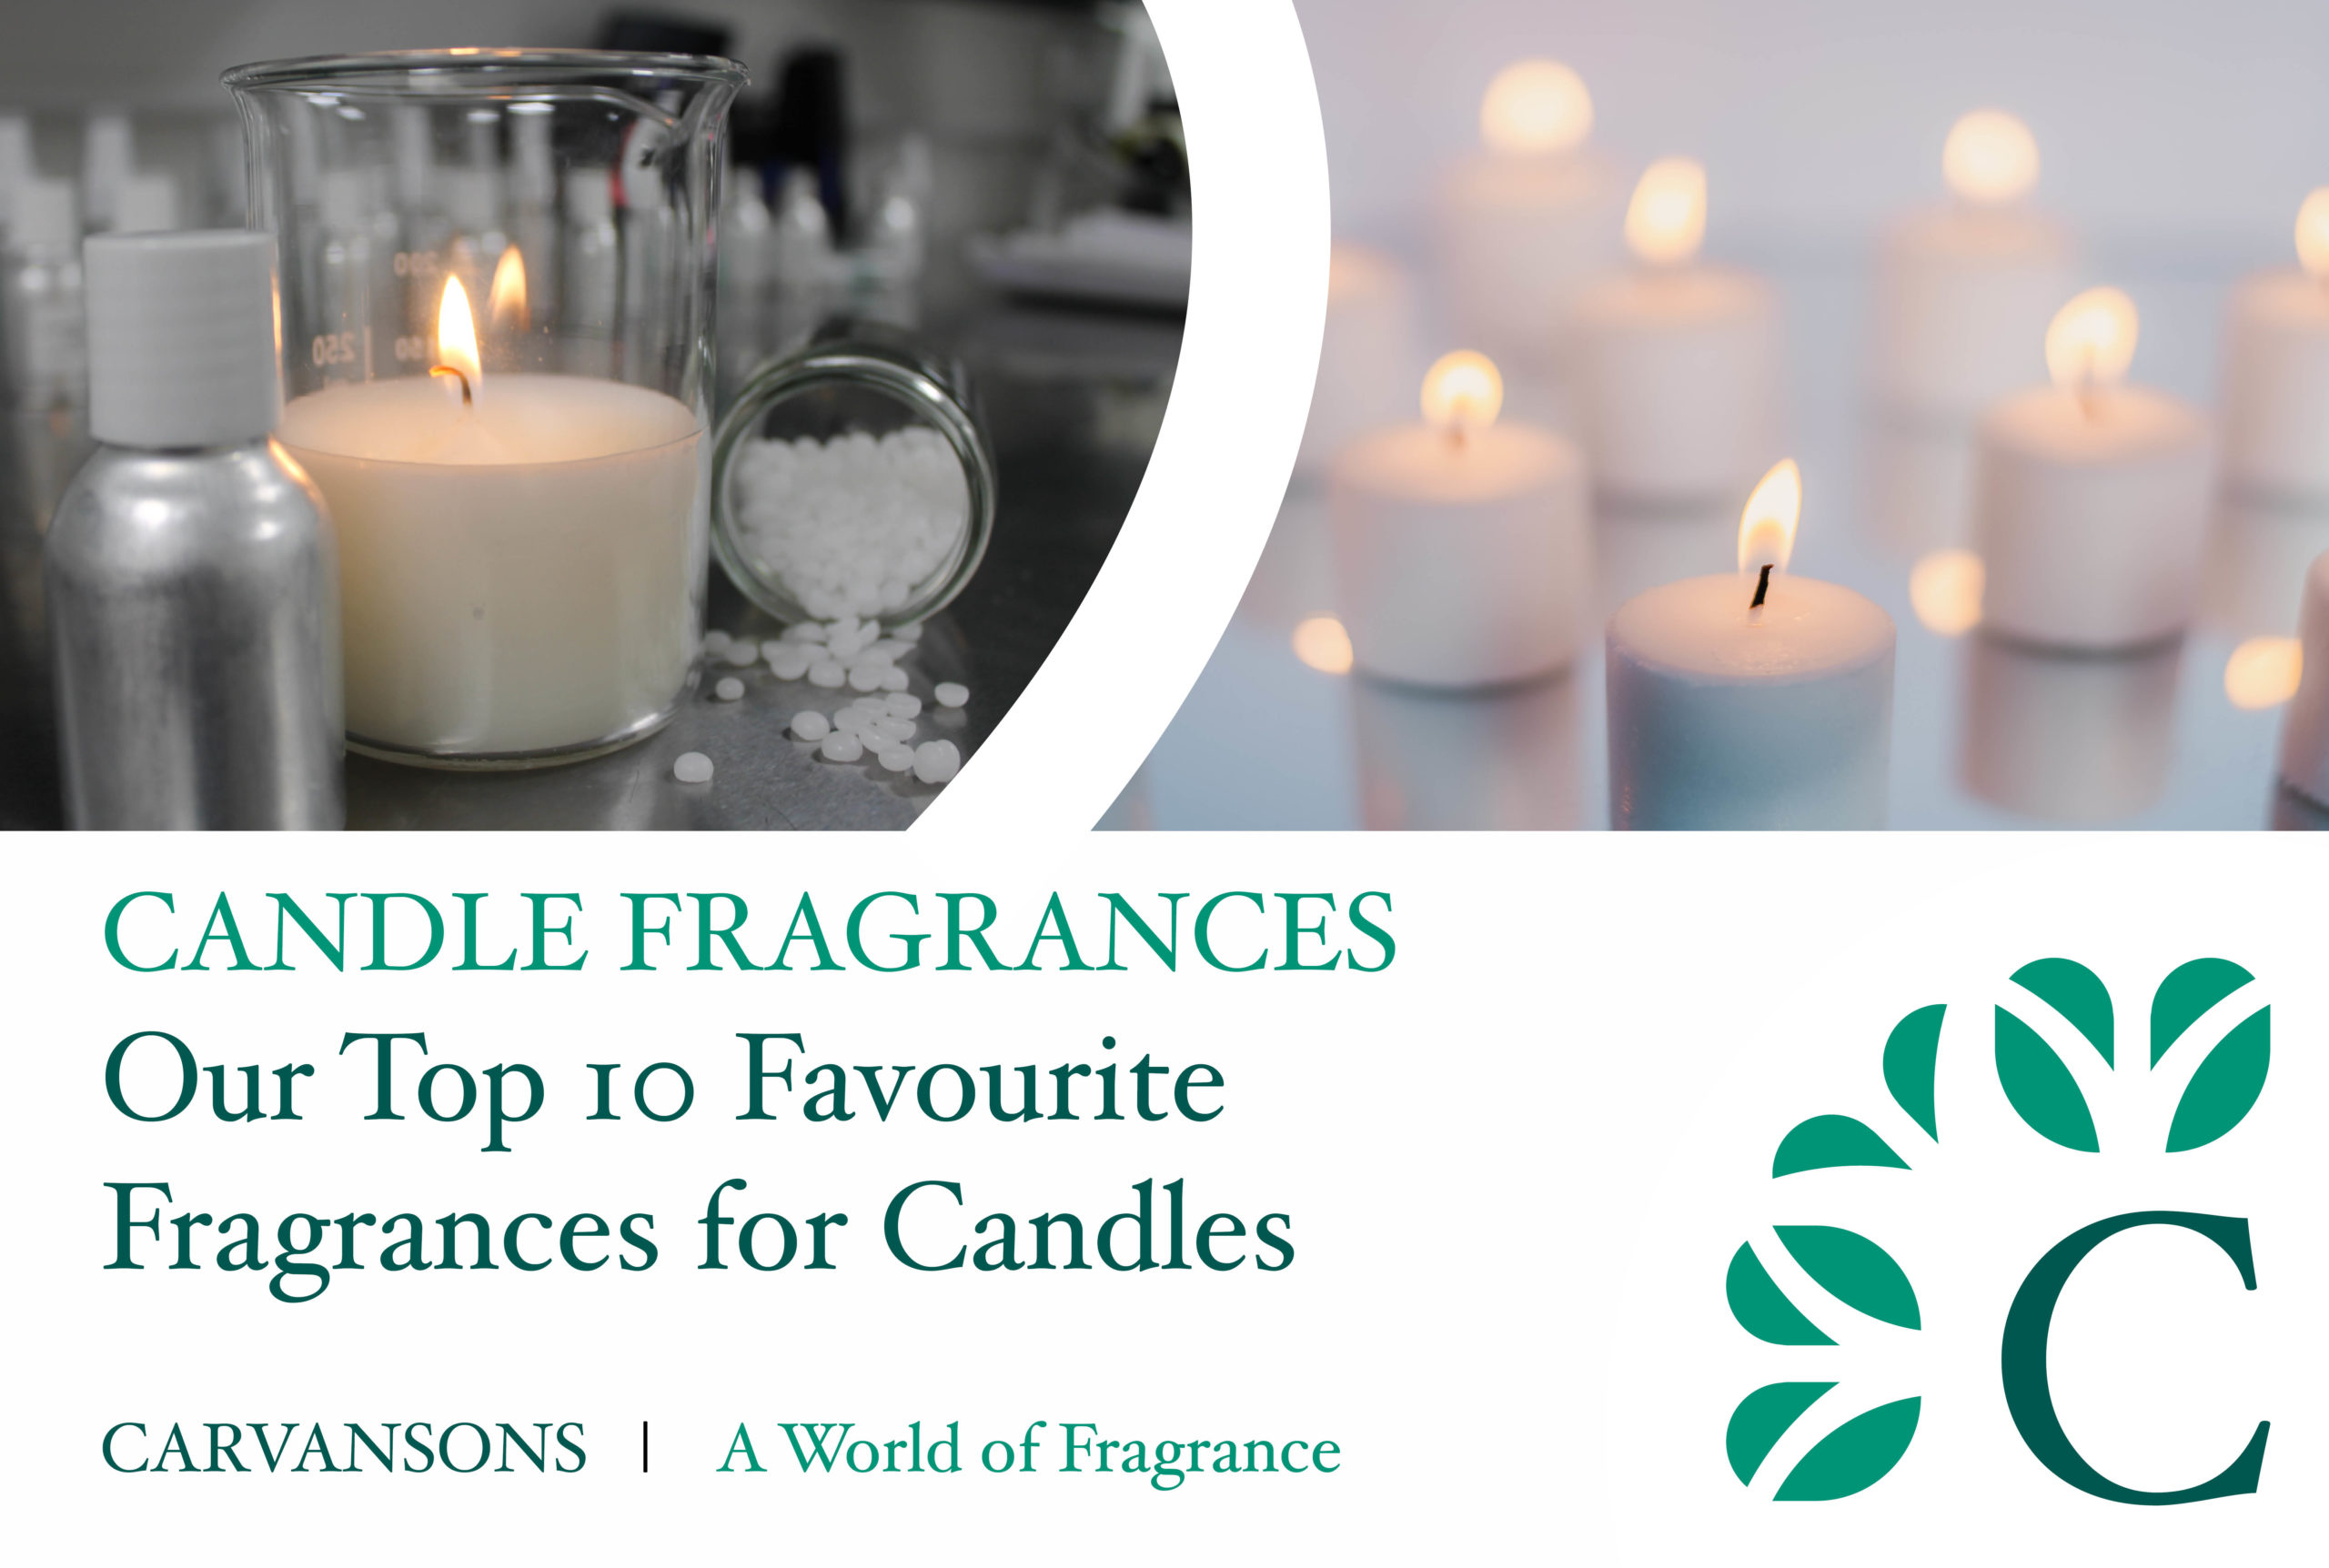 Relaxing Candle Scent - Best Relaxing Candle Scents & How to